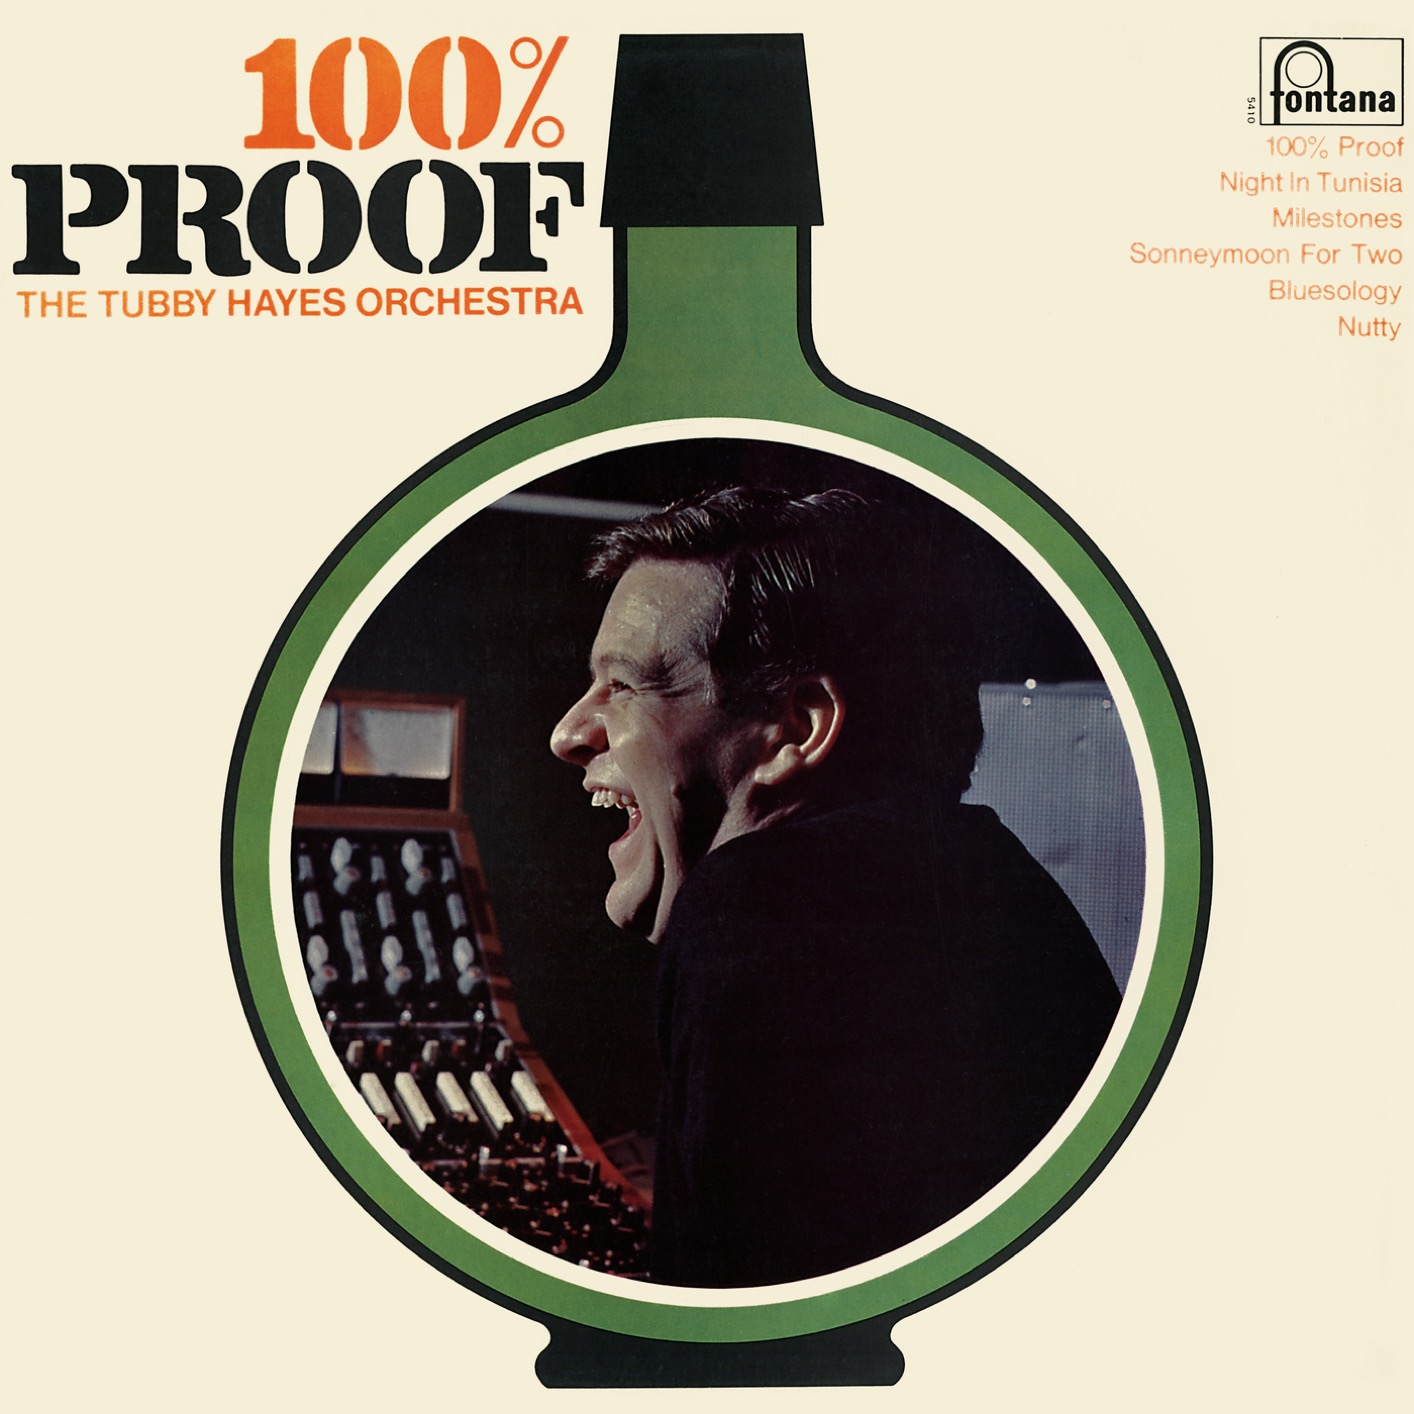 The Tubby Hayes Orchestra - 100% Proof (Remastered) (1967/2019) [FLAC 24bit/88,2kHz]